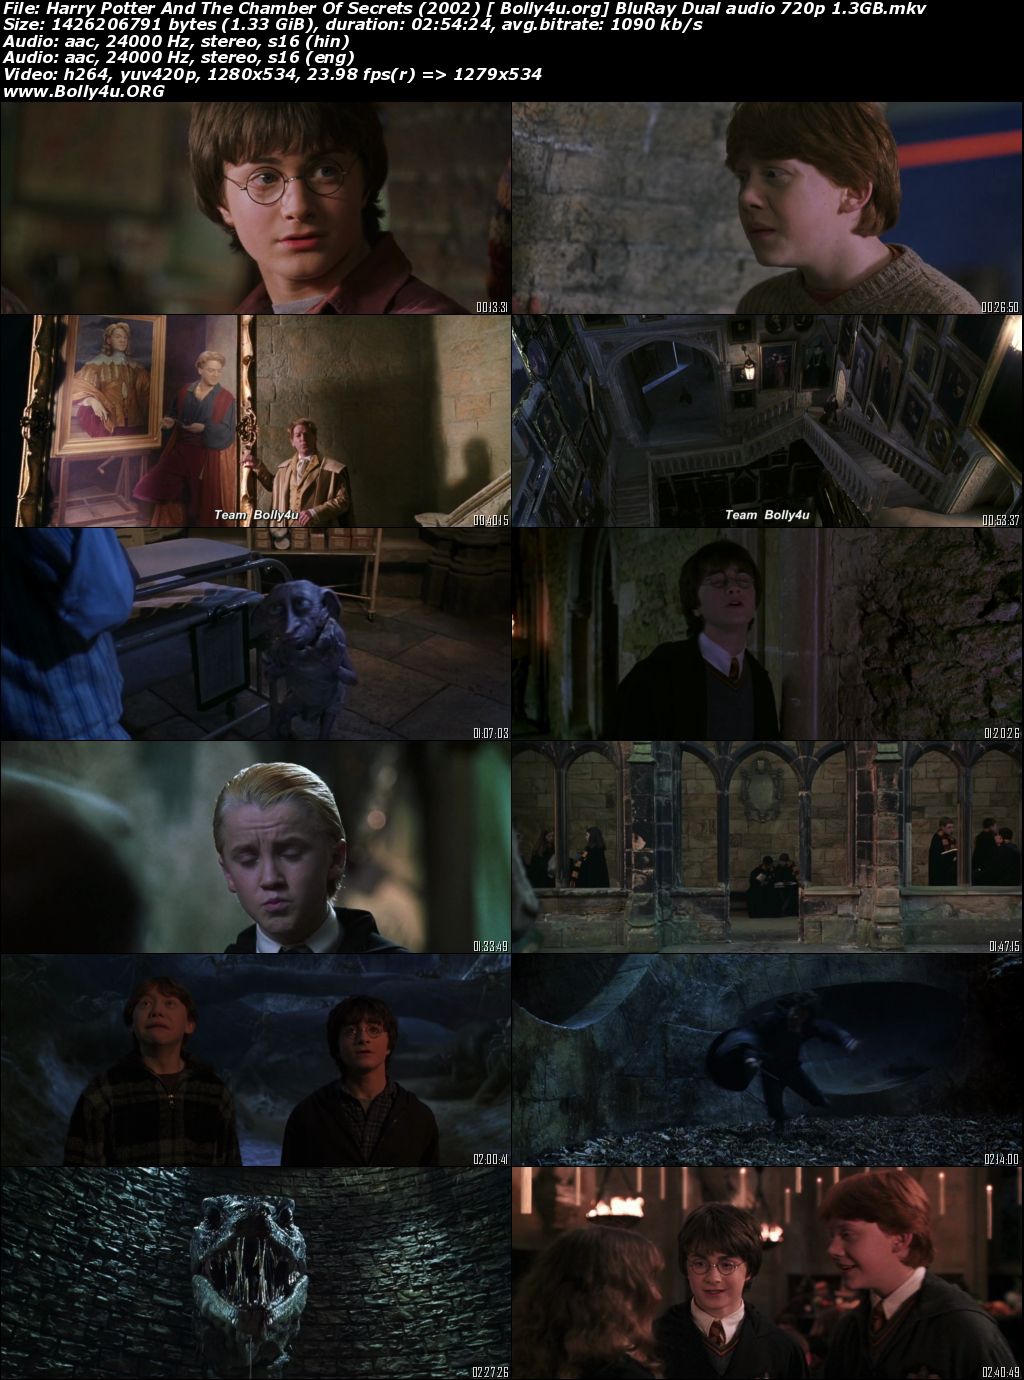 Harry Potter And The Chamber Of Secrets 2002 BRRip Hindi Dual Audio 720p Download